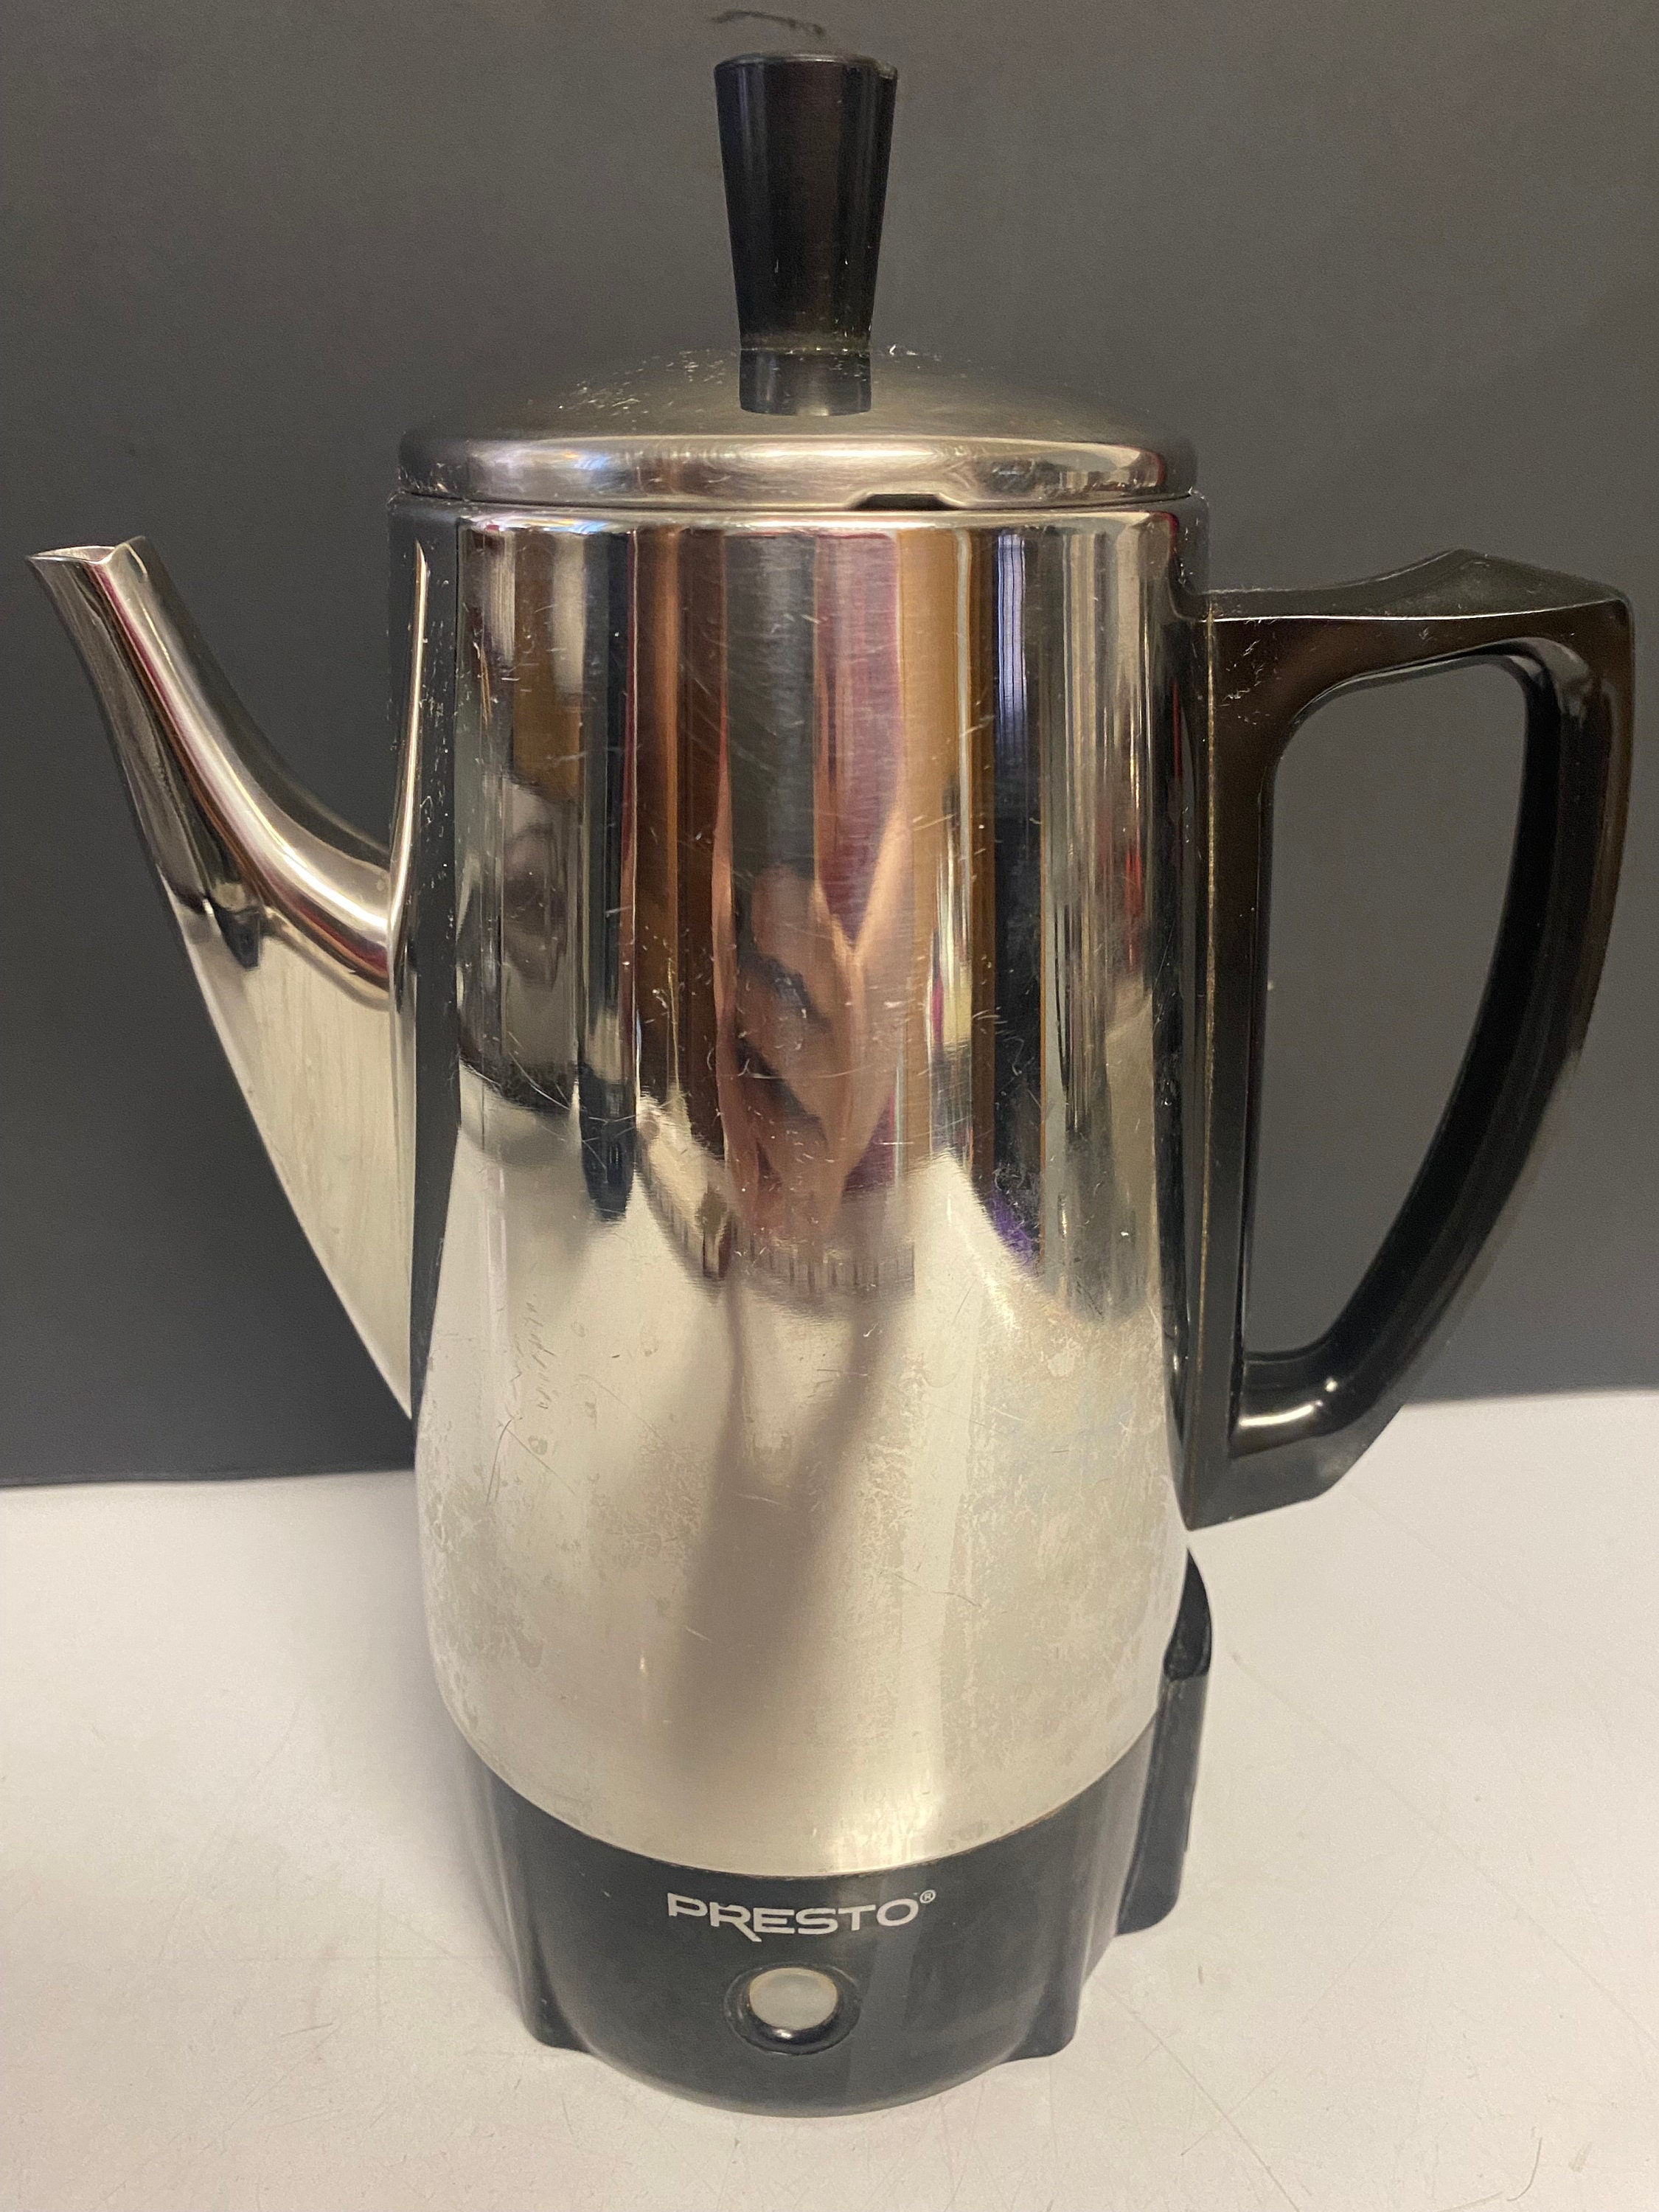 VTG Kenmore Water Kettle Electric Chrome Tea Coffee 1950's Made in USA NICE!